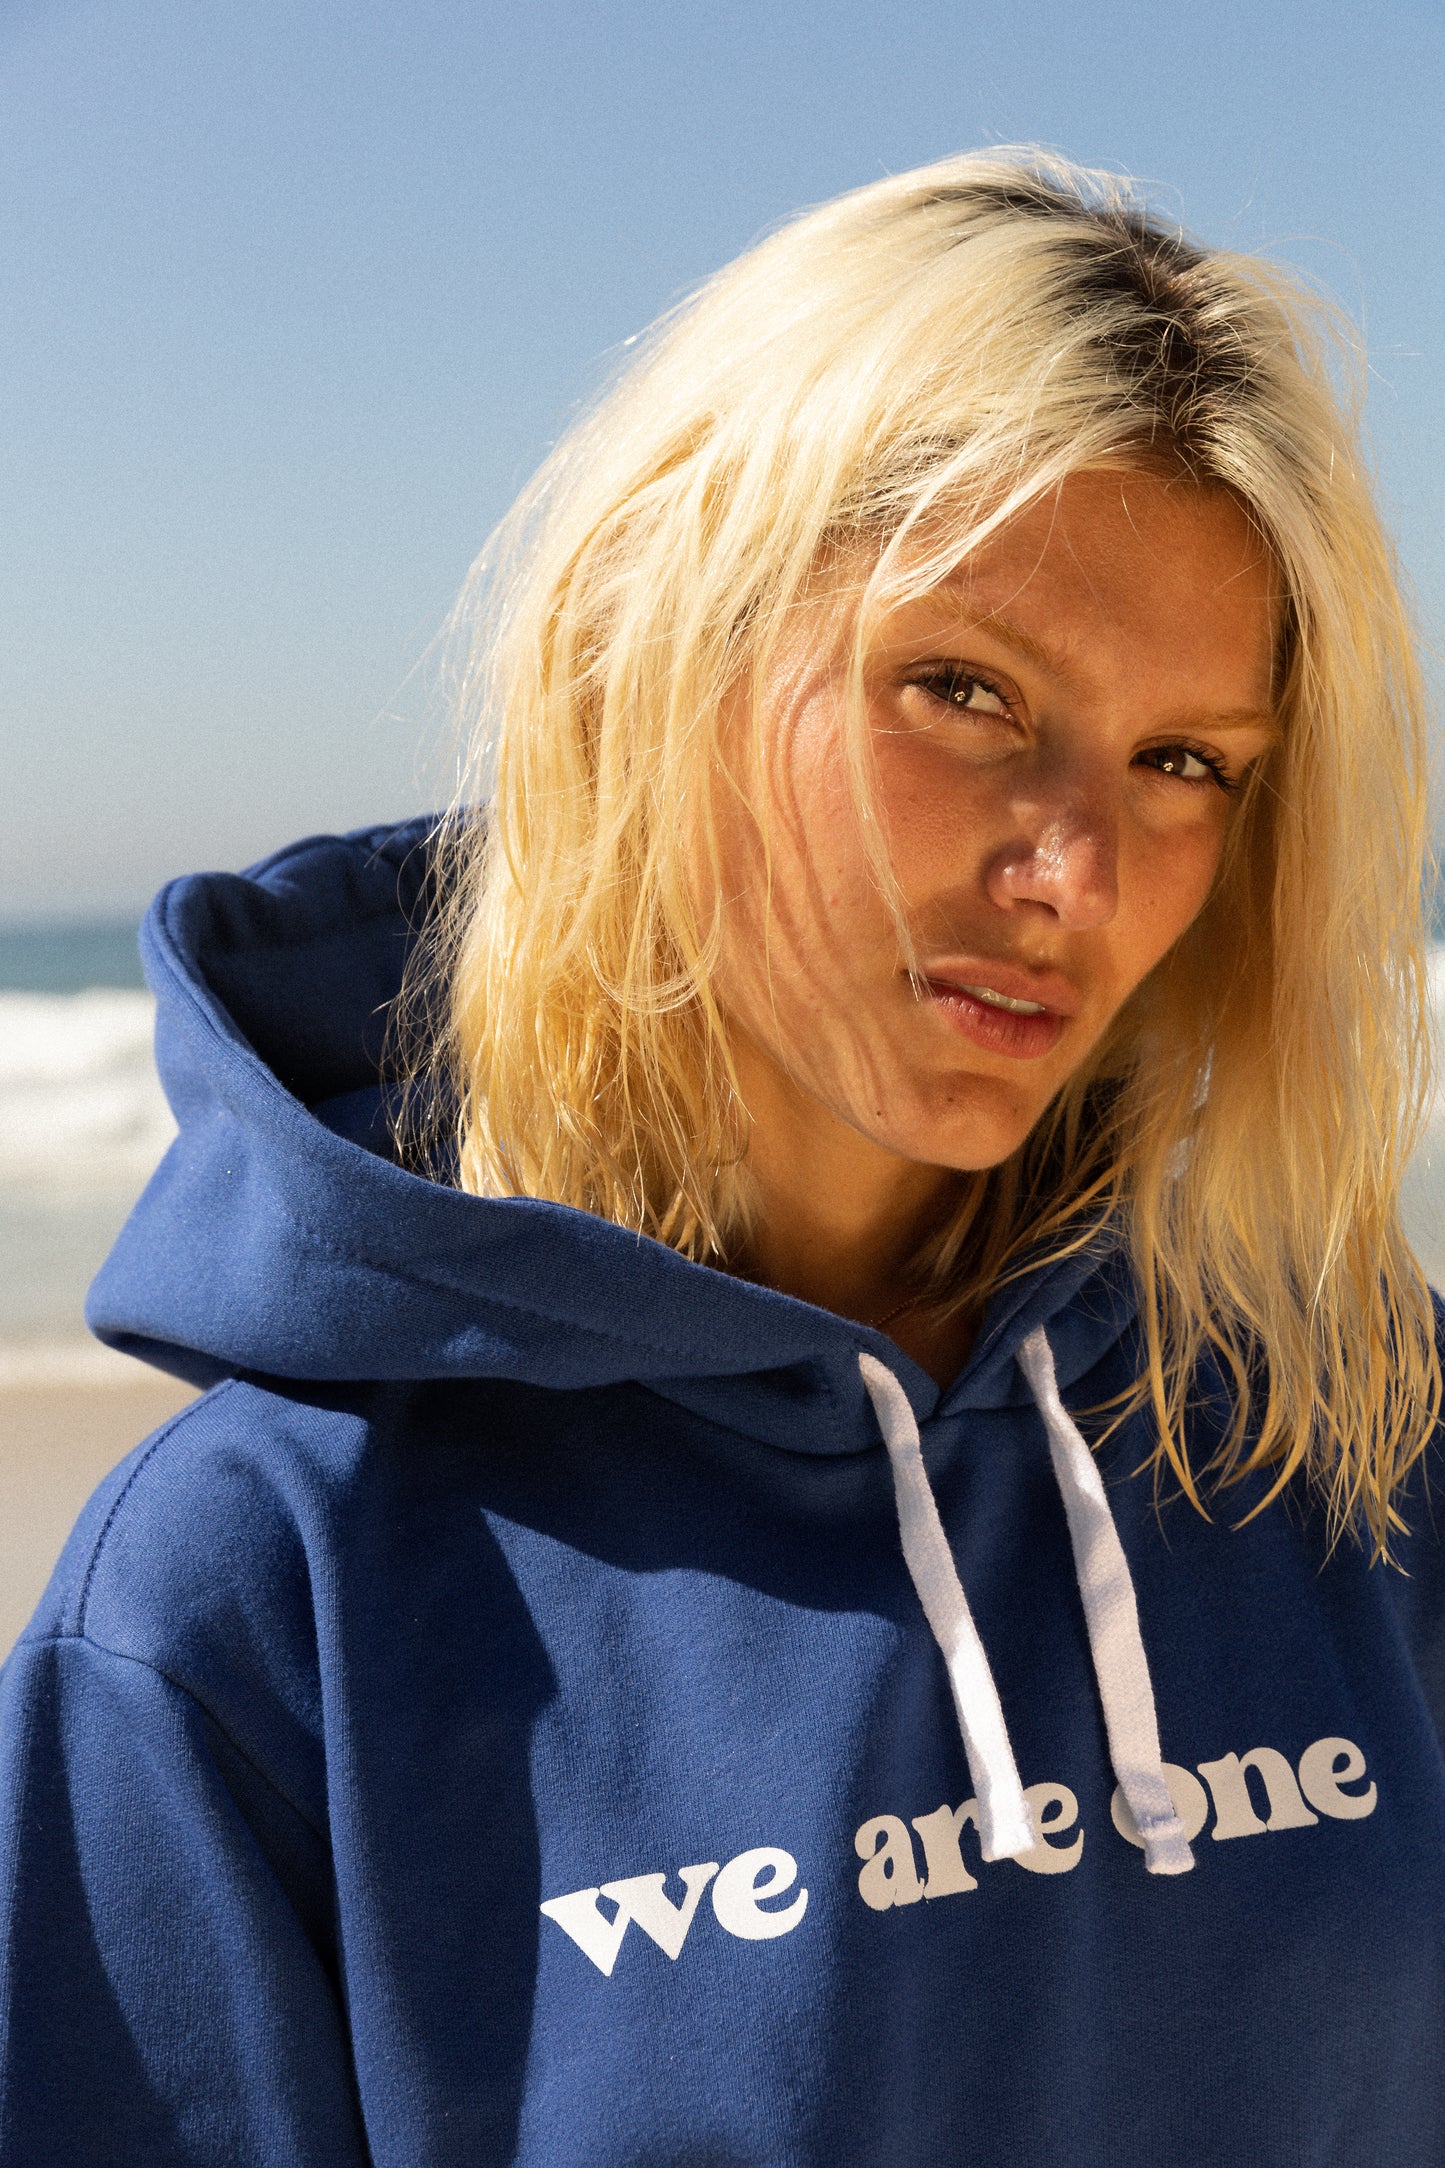 HOODIE WE ARE ONE #azul